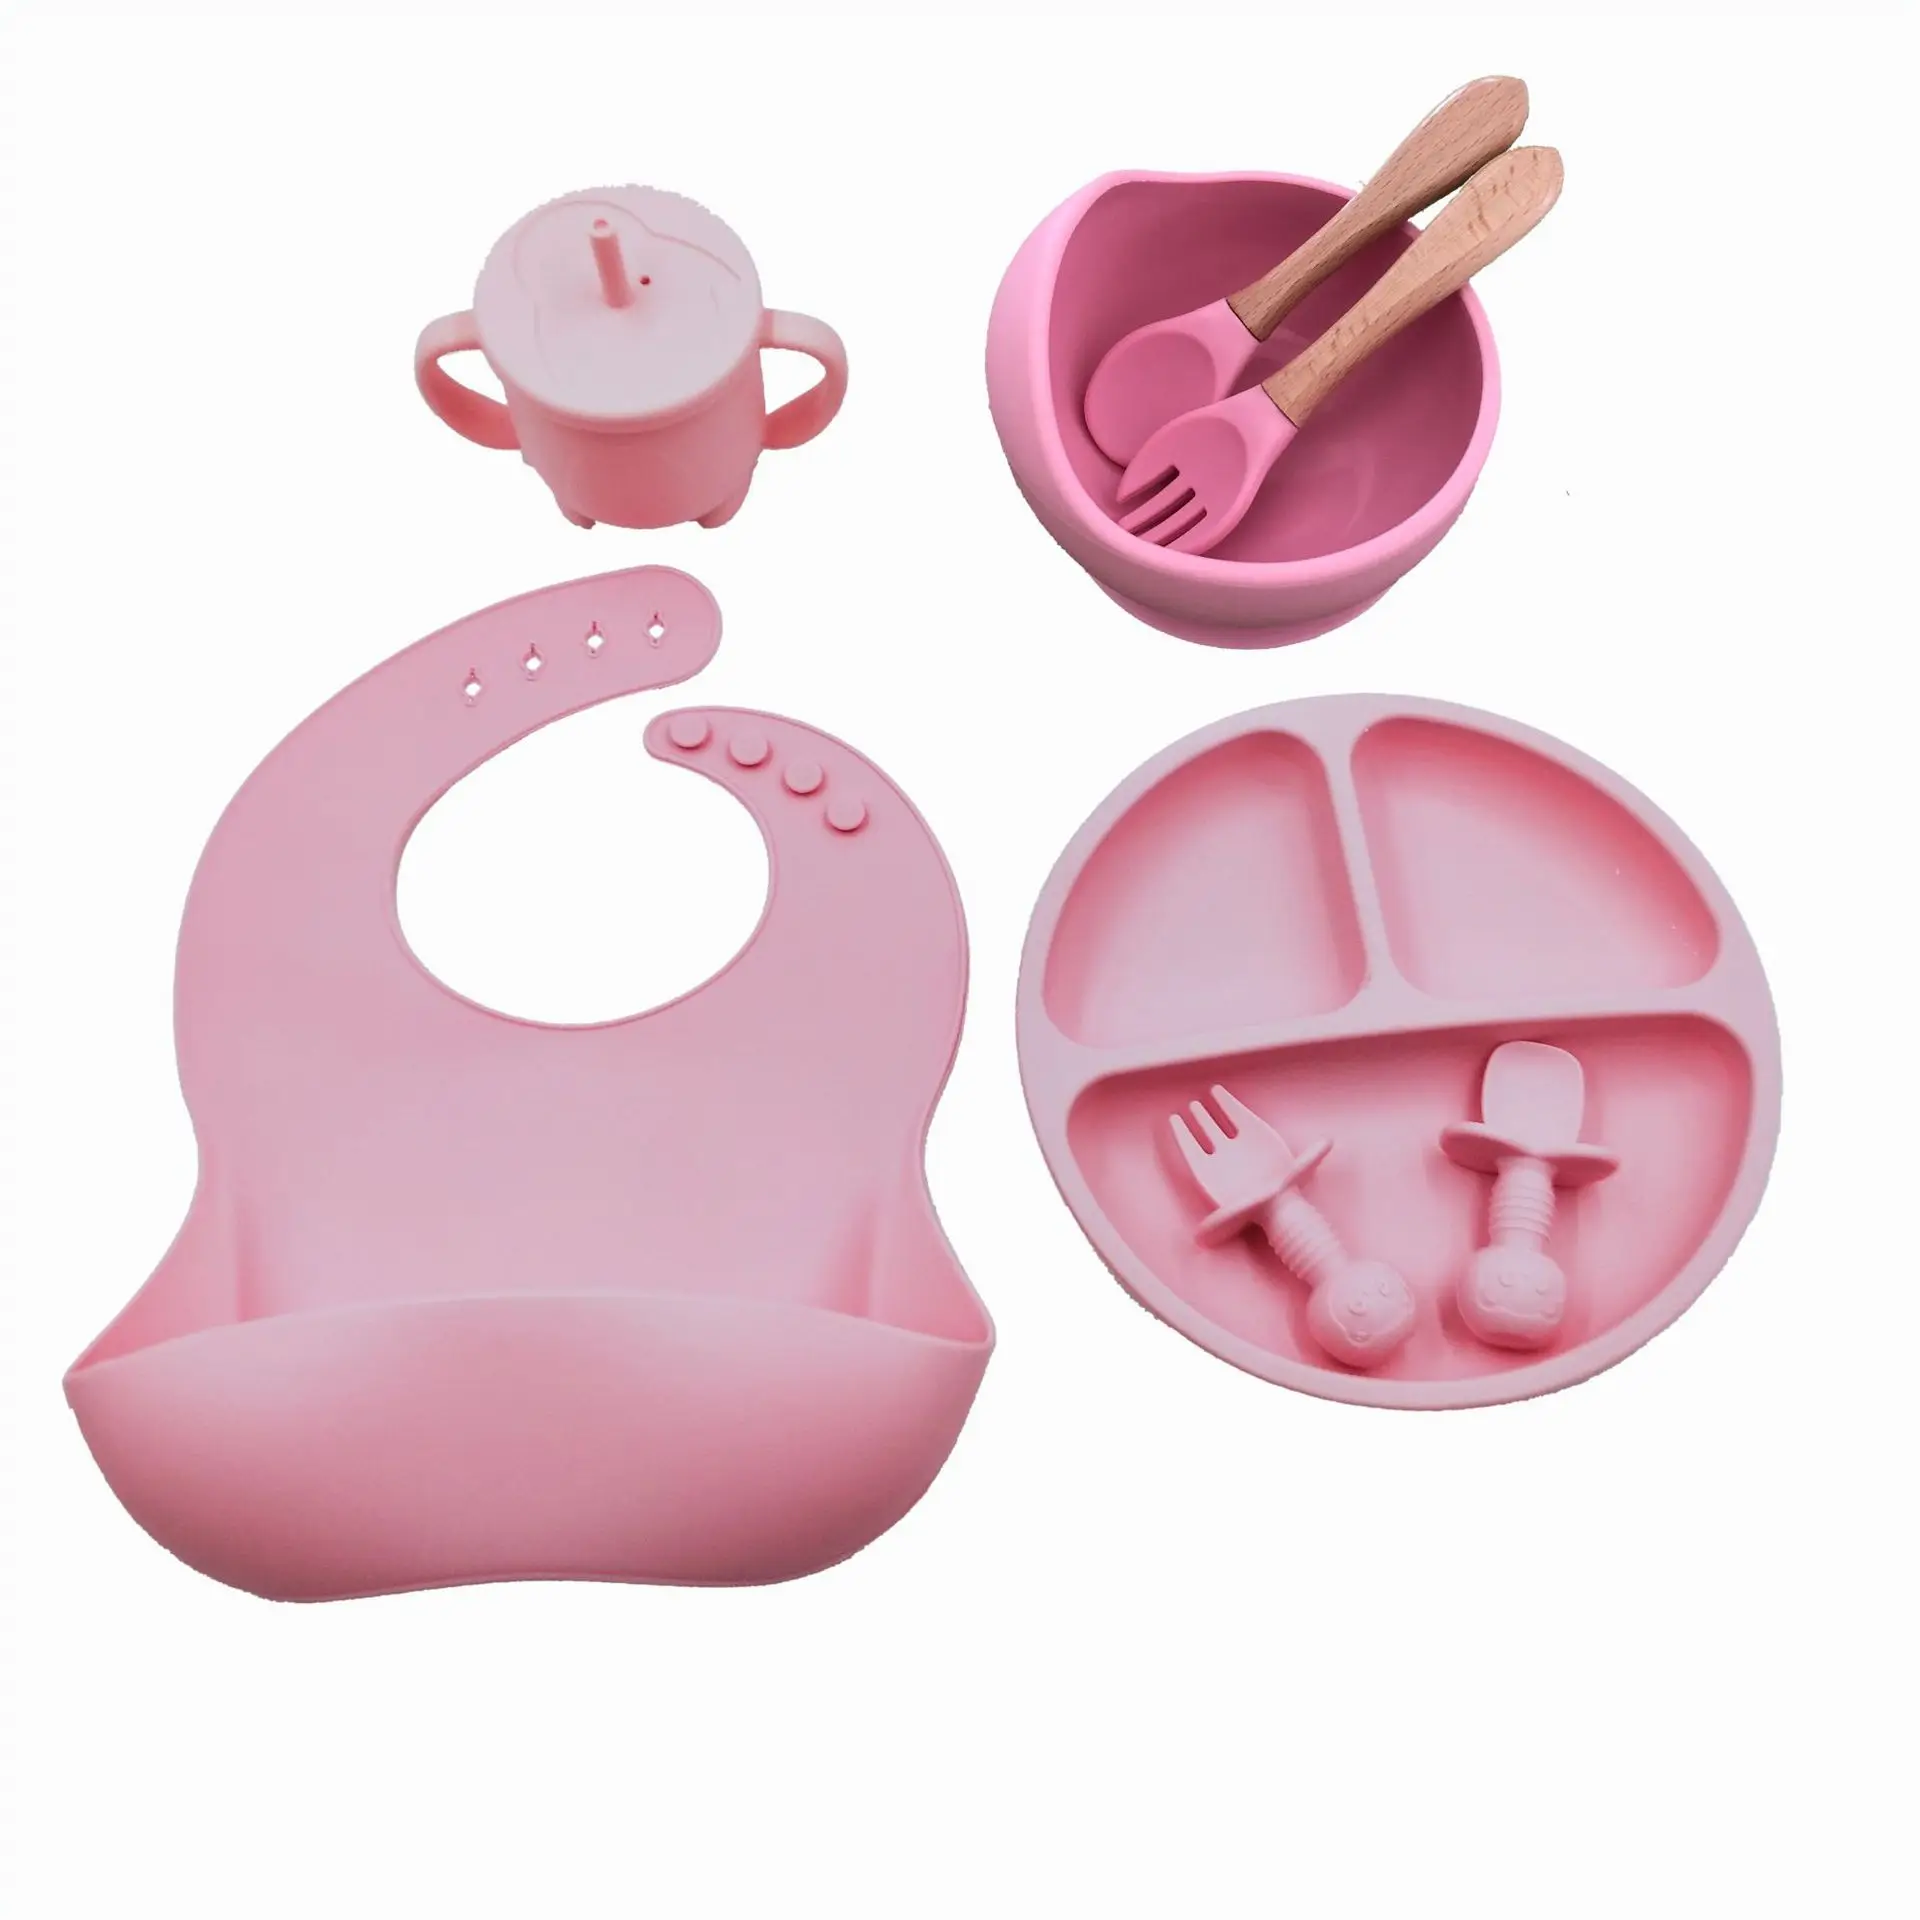 Hot selling silicone baby feeding tableware baby silicone bowl baby eating Bib dinner plate fork spoon water cup set